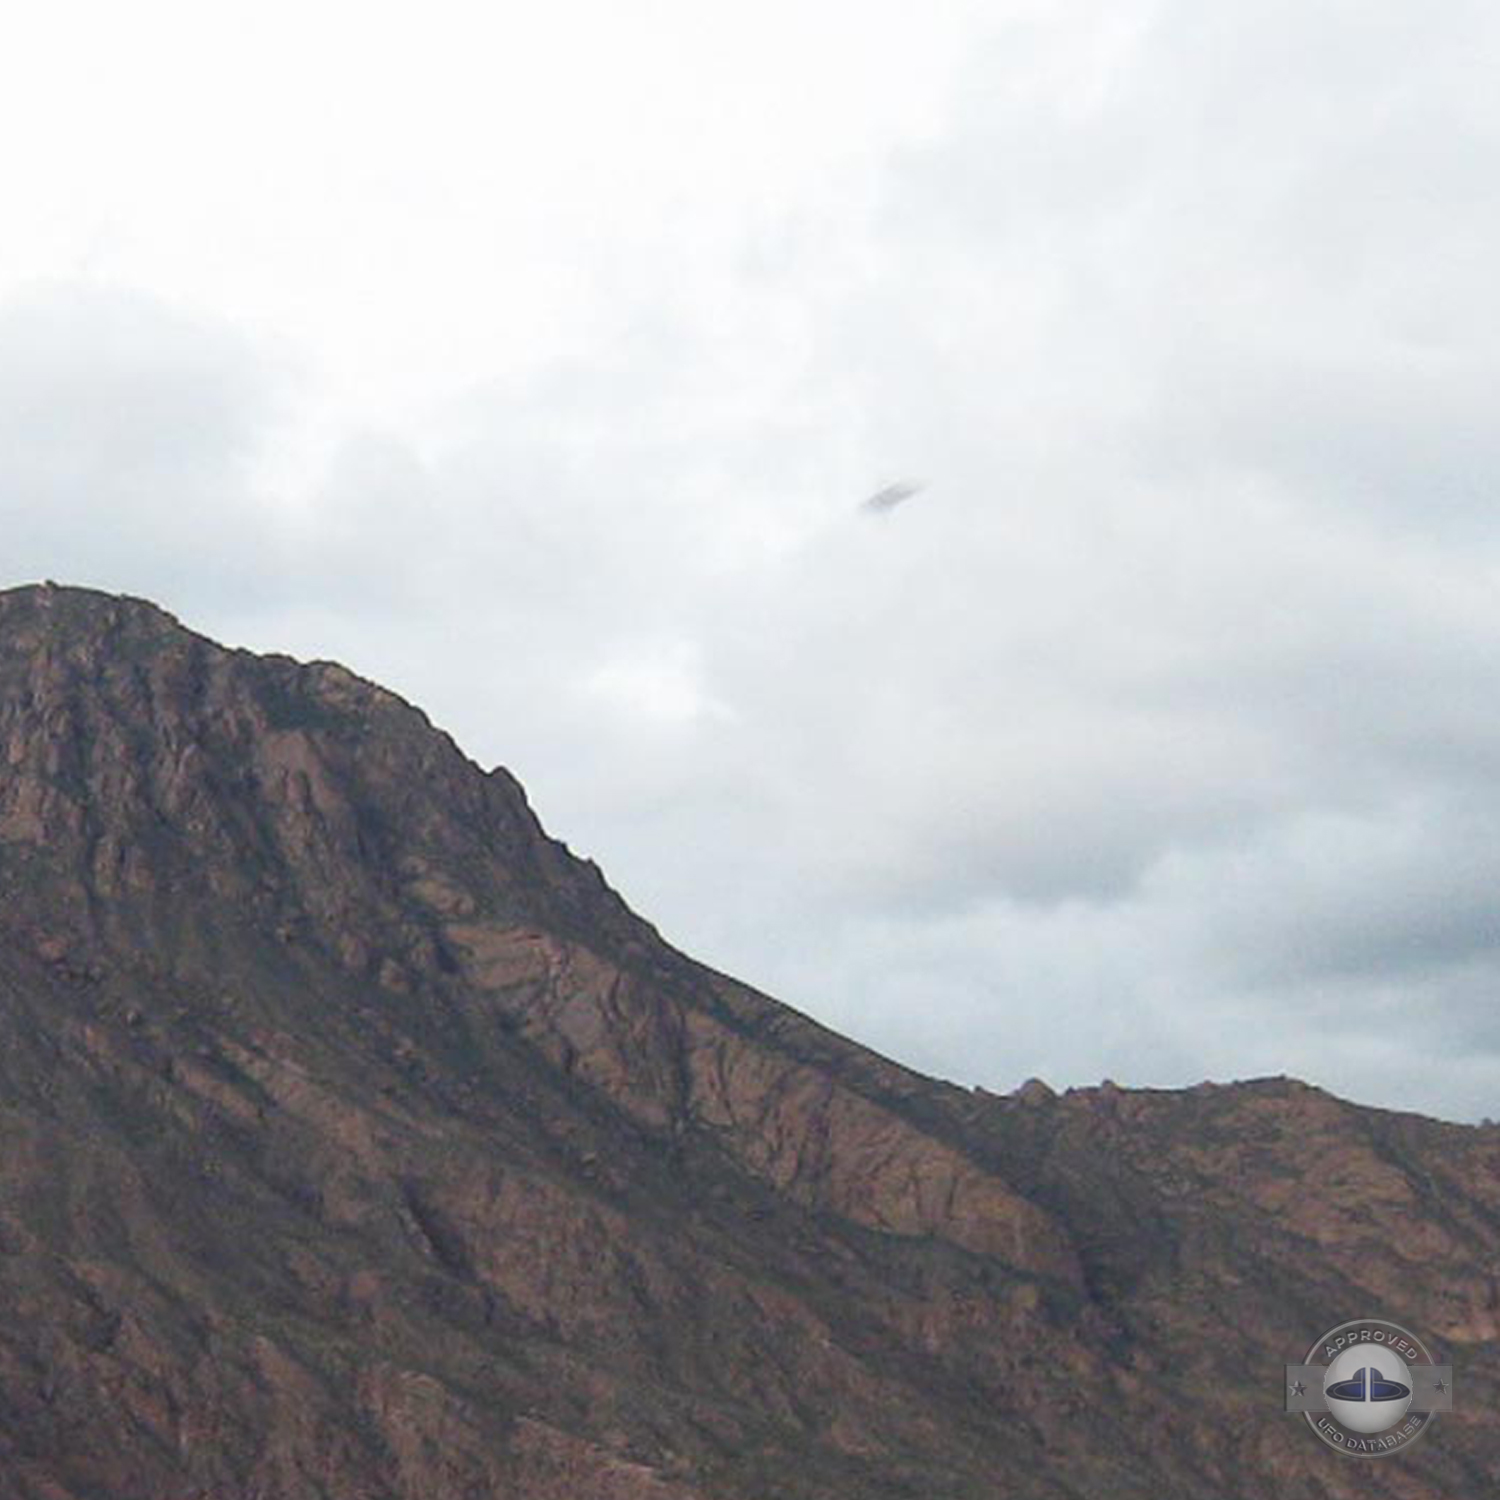 UFO over Mountains near Cafayate, Argentina | Jan 9 2011 UFO Picture UFO Picture #240-3